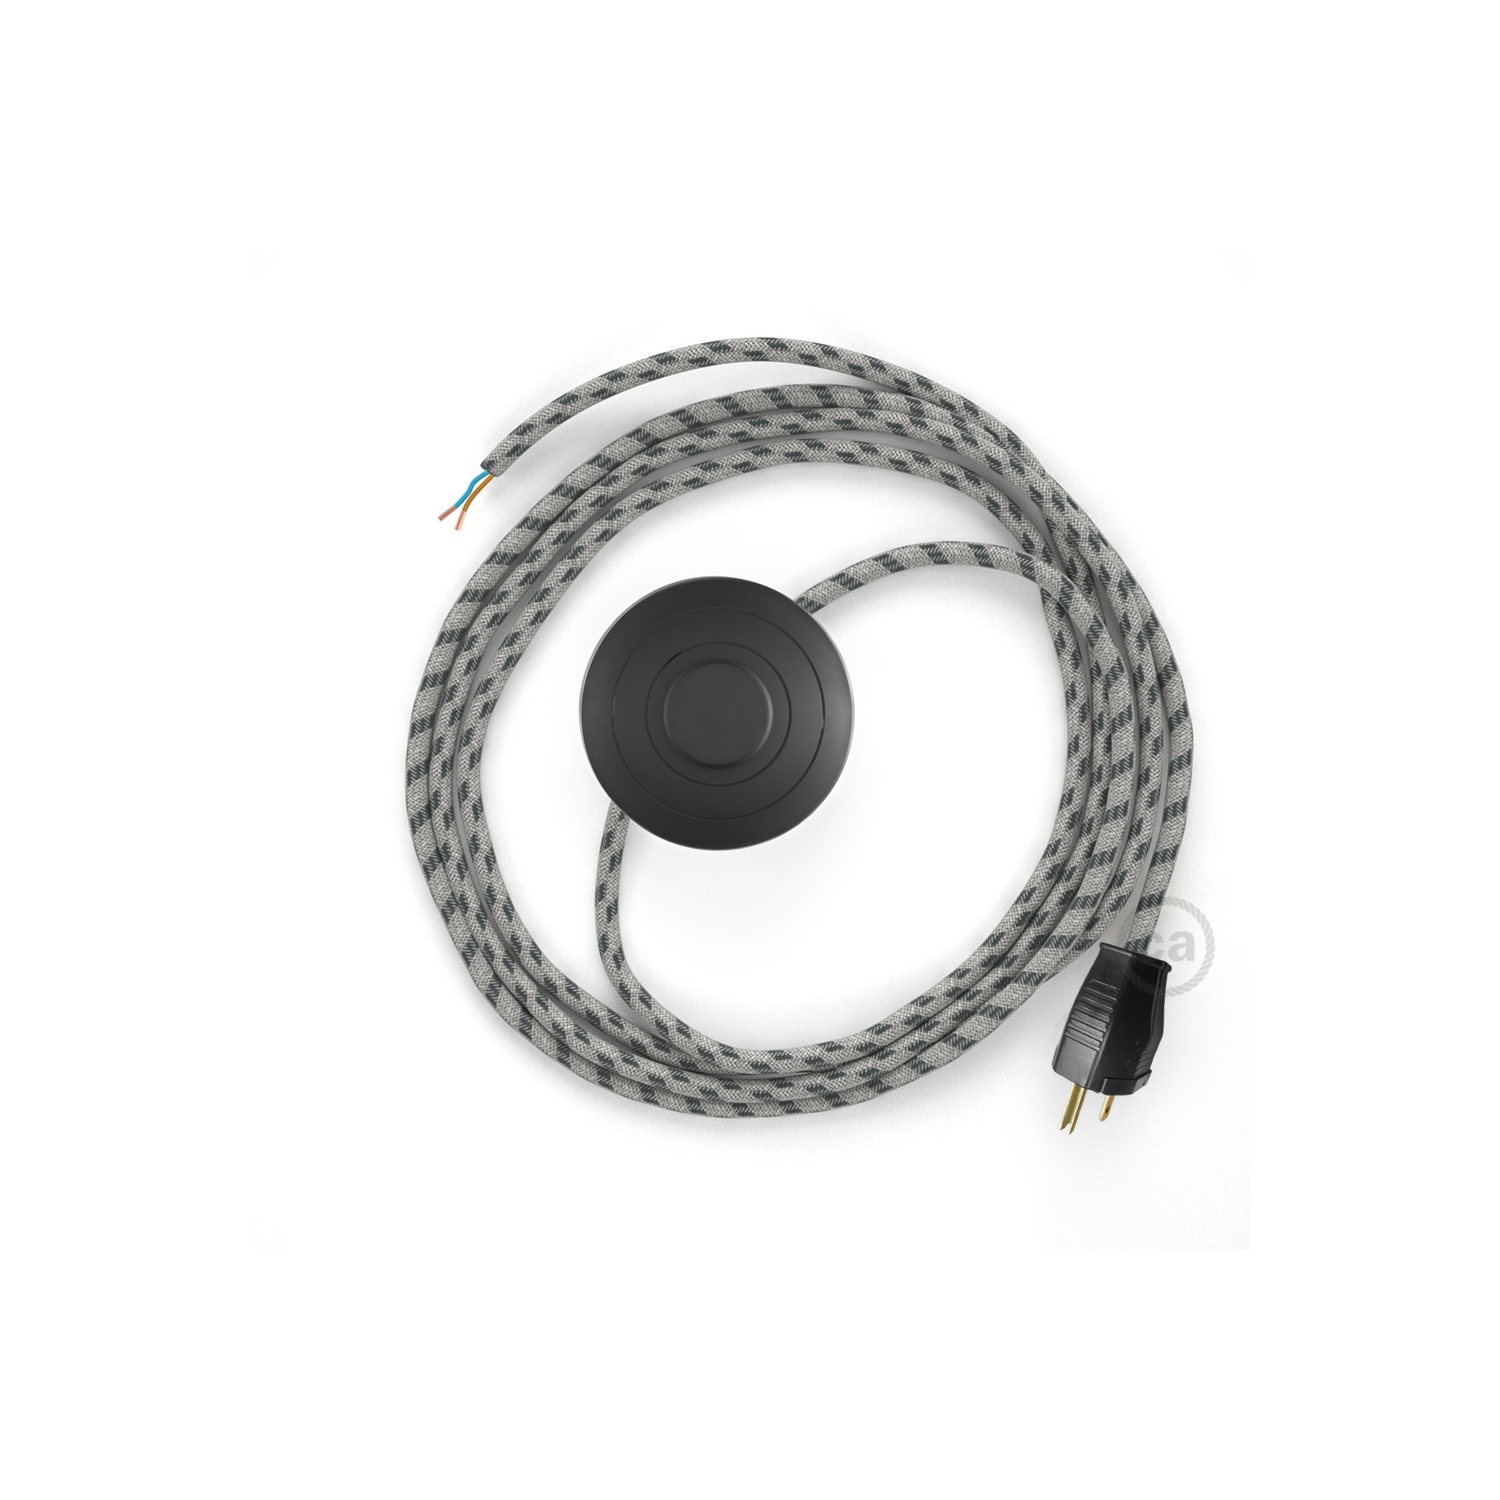 Power Cord with foot switch, RD54 Natural & Charcoal Linen Stripe - Choose color of switch/plug